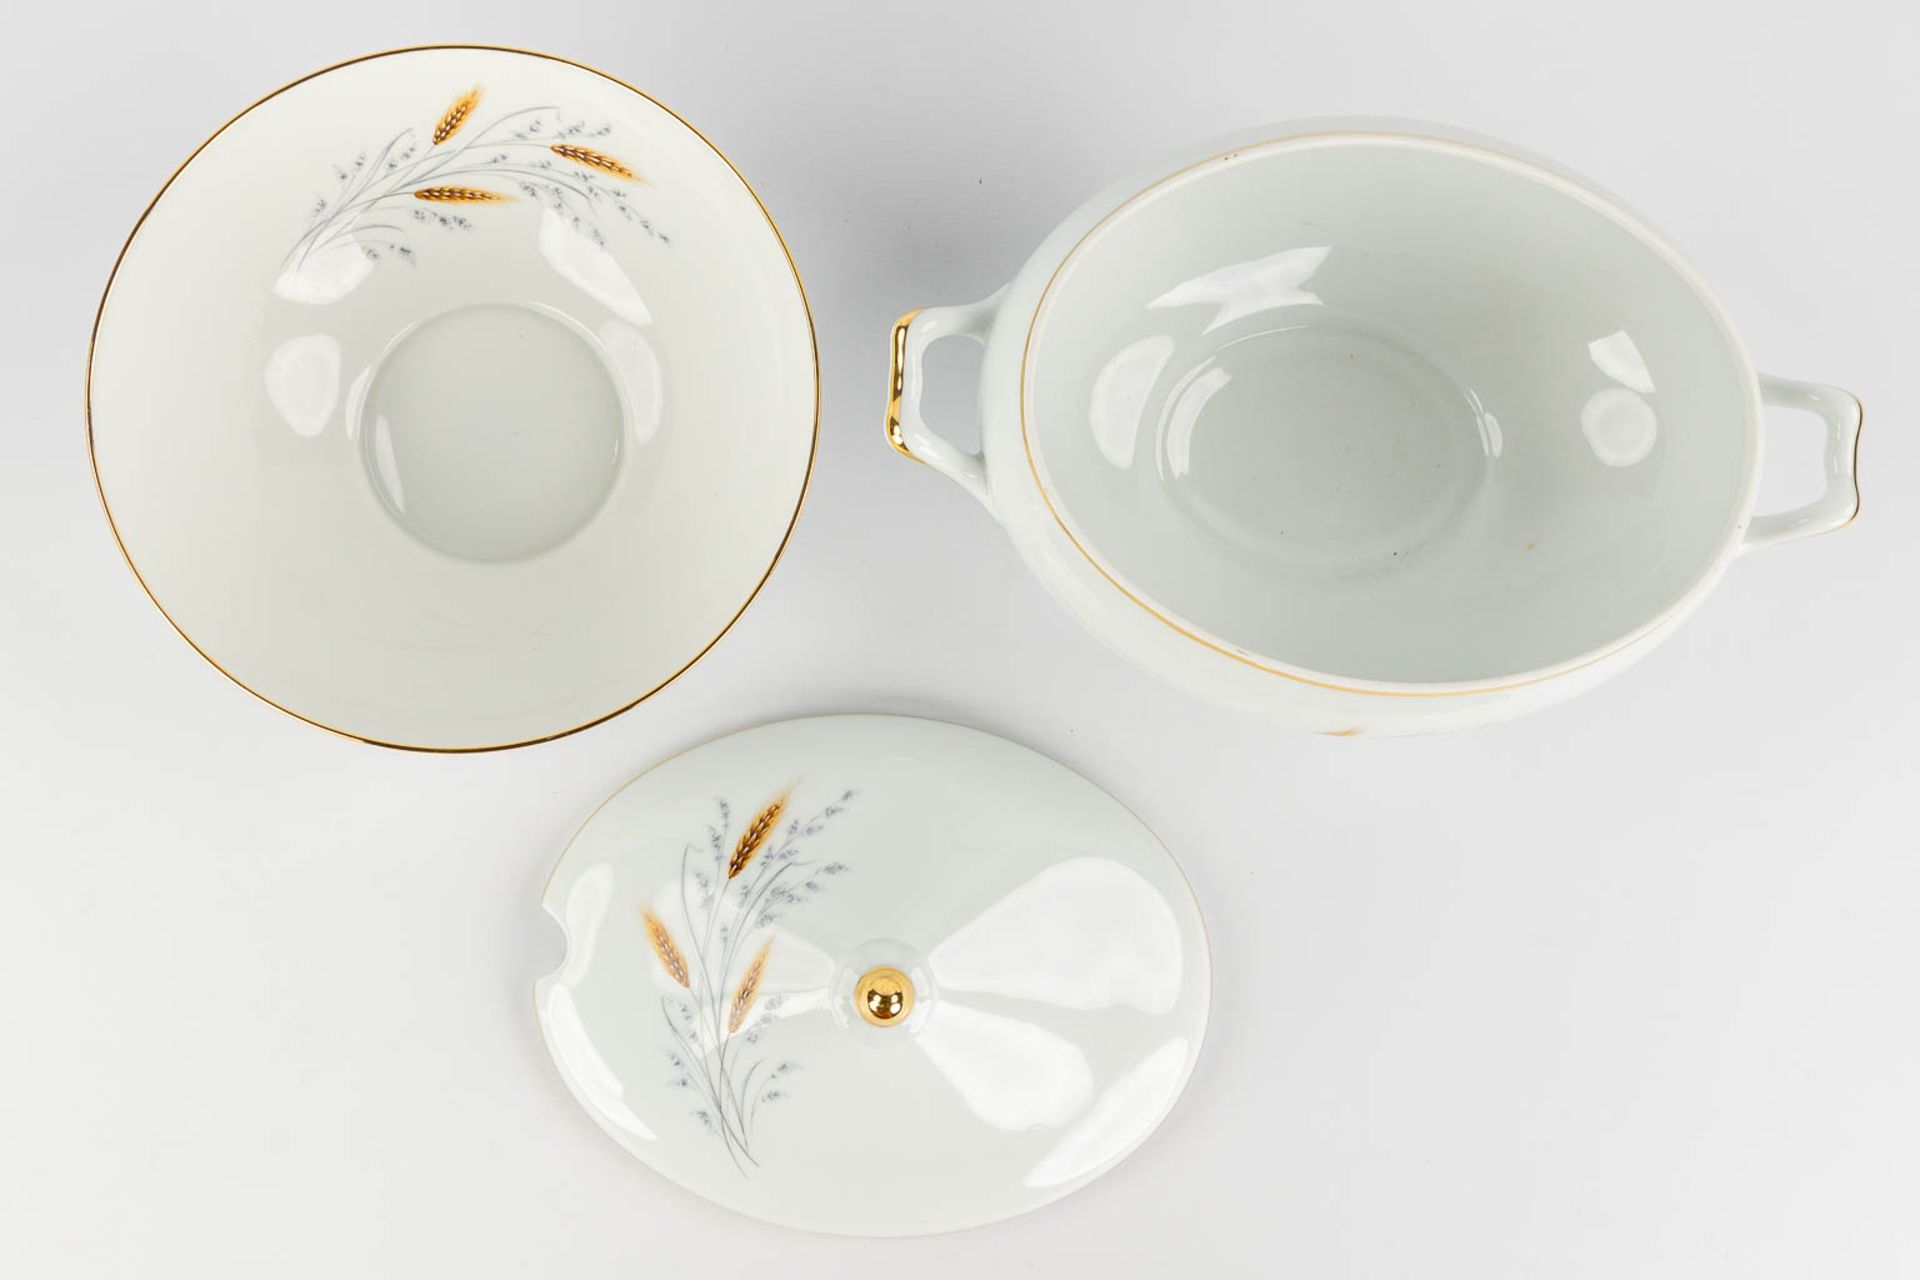 Limoges, France, a large, 12-person dinner, wild and coffee service. (L:23 x W:34 x H:22 cm) - Image 14 of 28